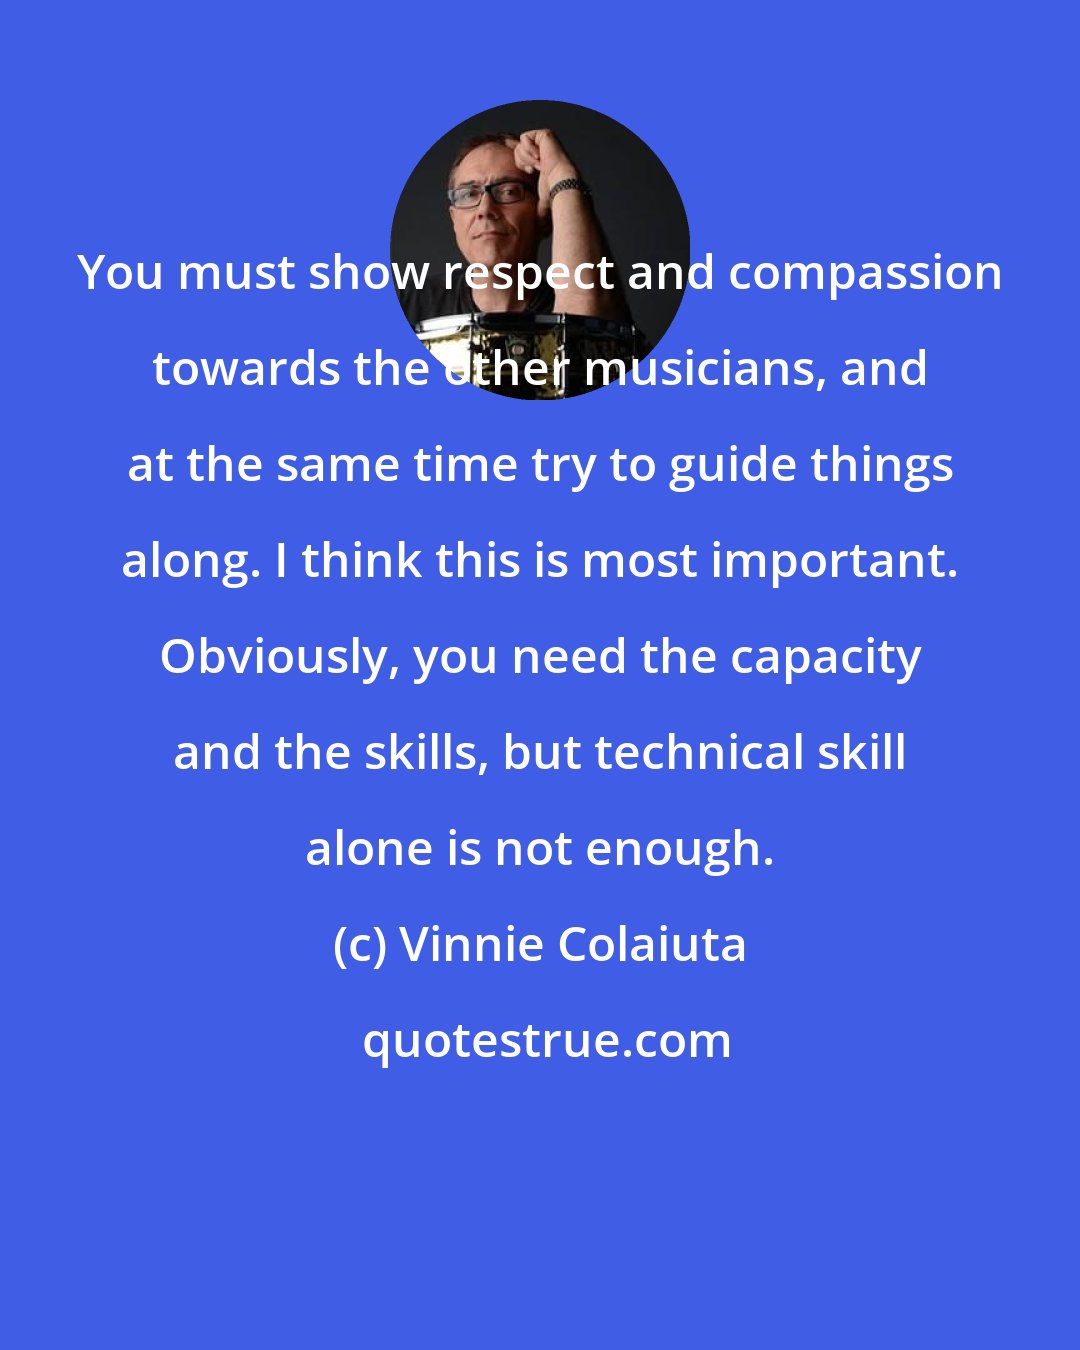 Vinnie Colaiuta: You must show respect and compassion towards the other musicians, and at the same time try to guide things along. I think this is most important. Obviously, you need the capacity and the skills, but technical skill alone is not enough.